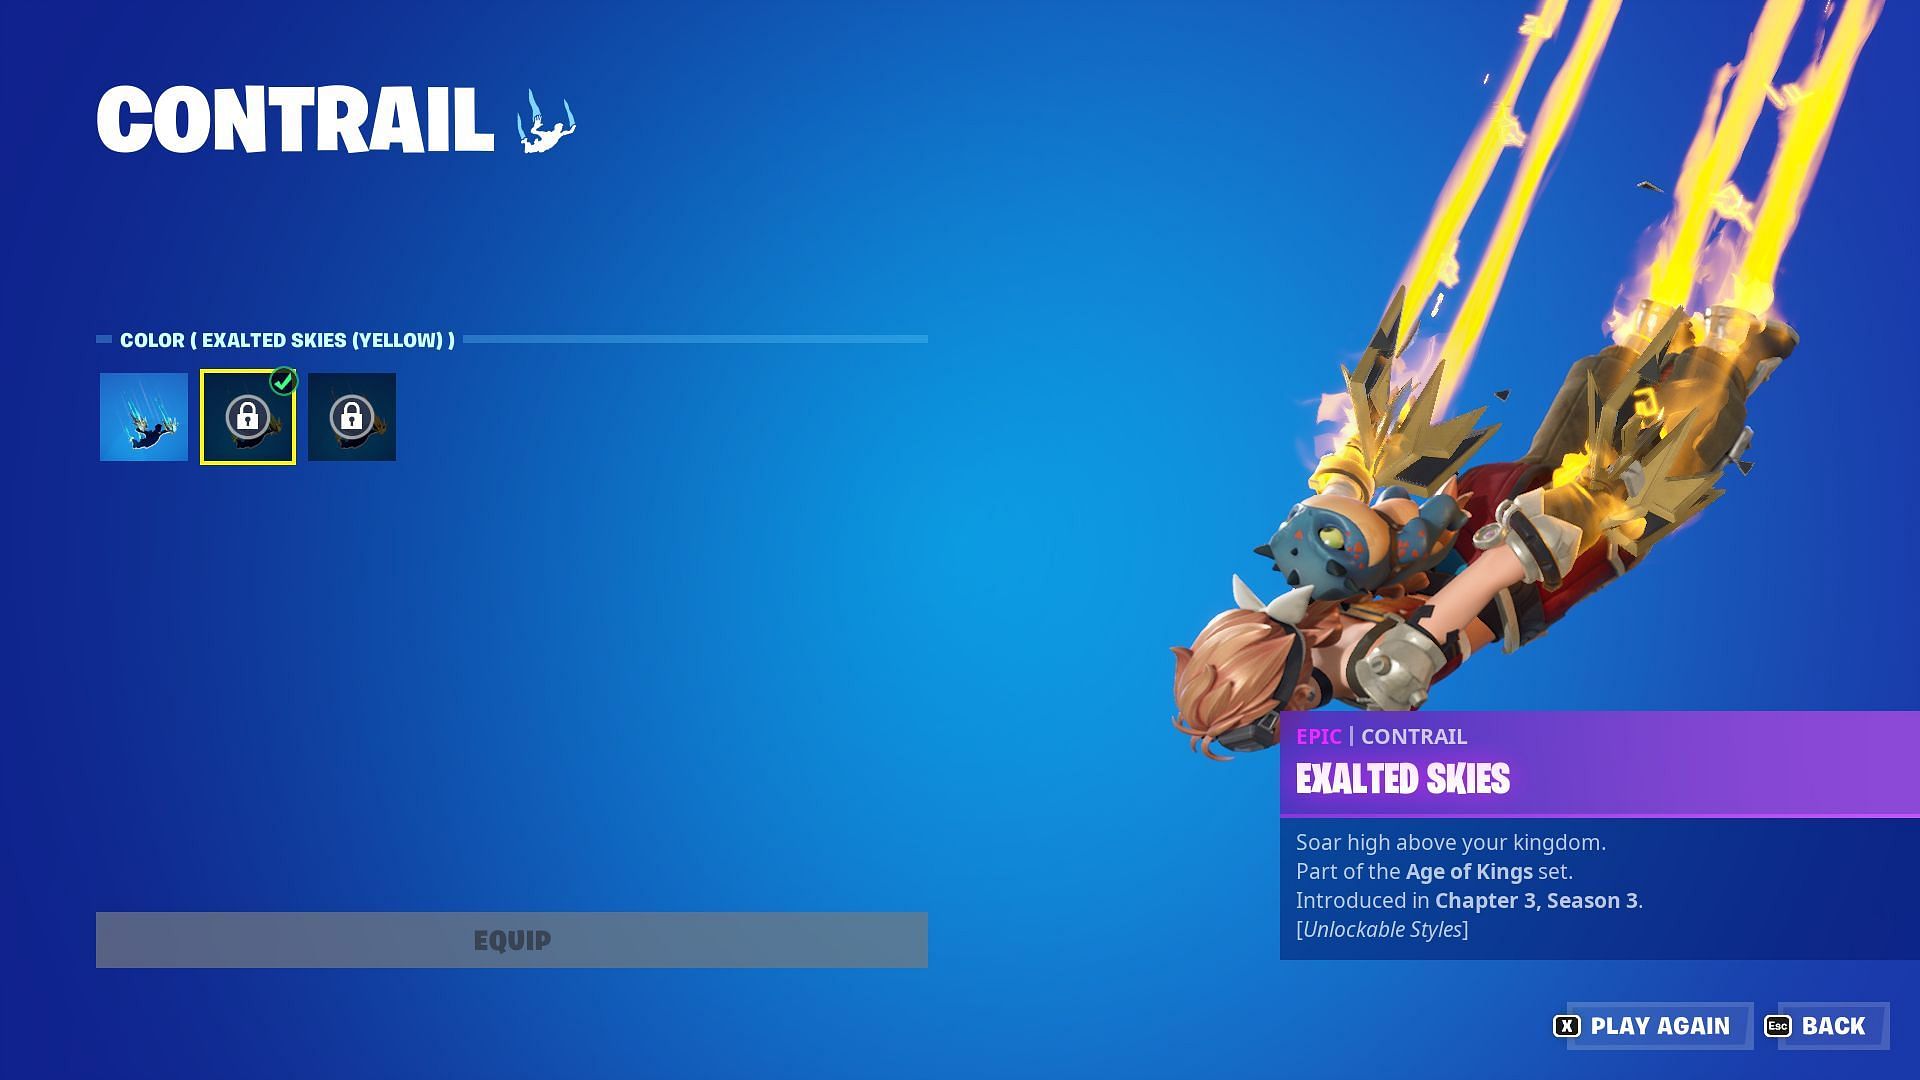 Despite the Contrail being unlocked, the additional Styles are not (Image via Epic Games/Fortnite)